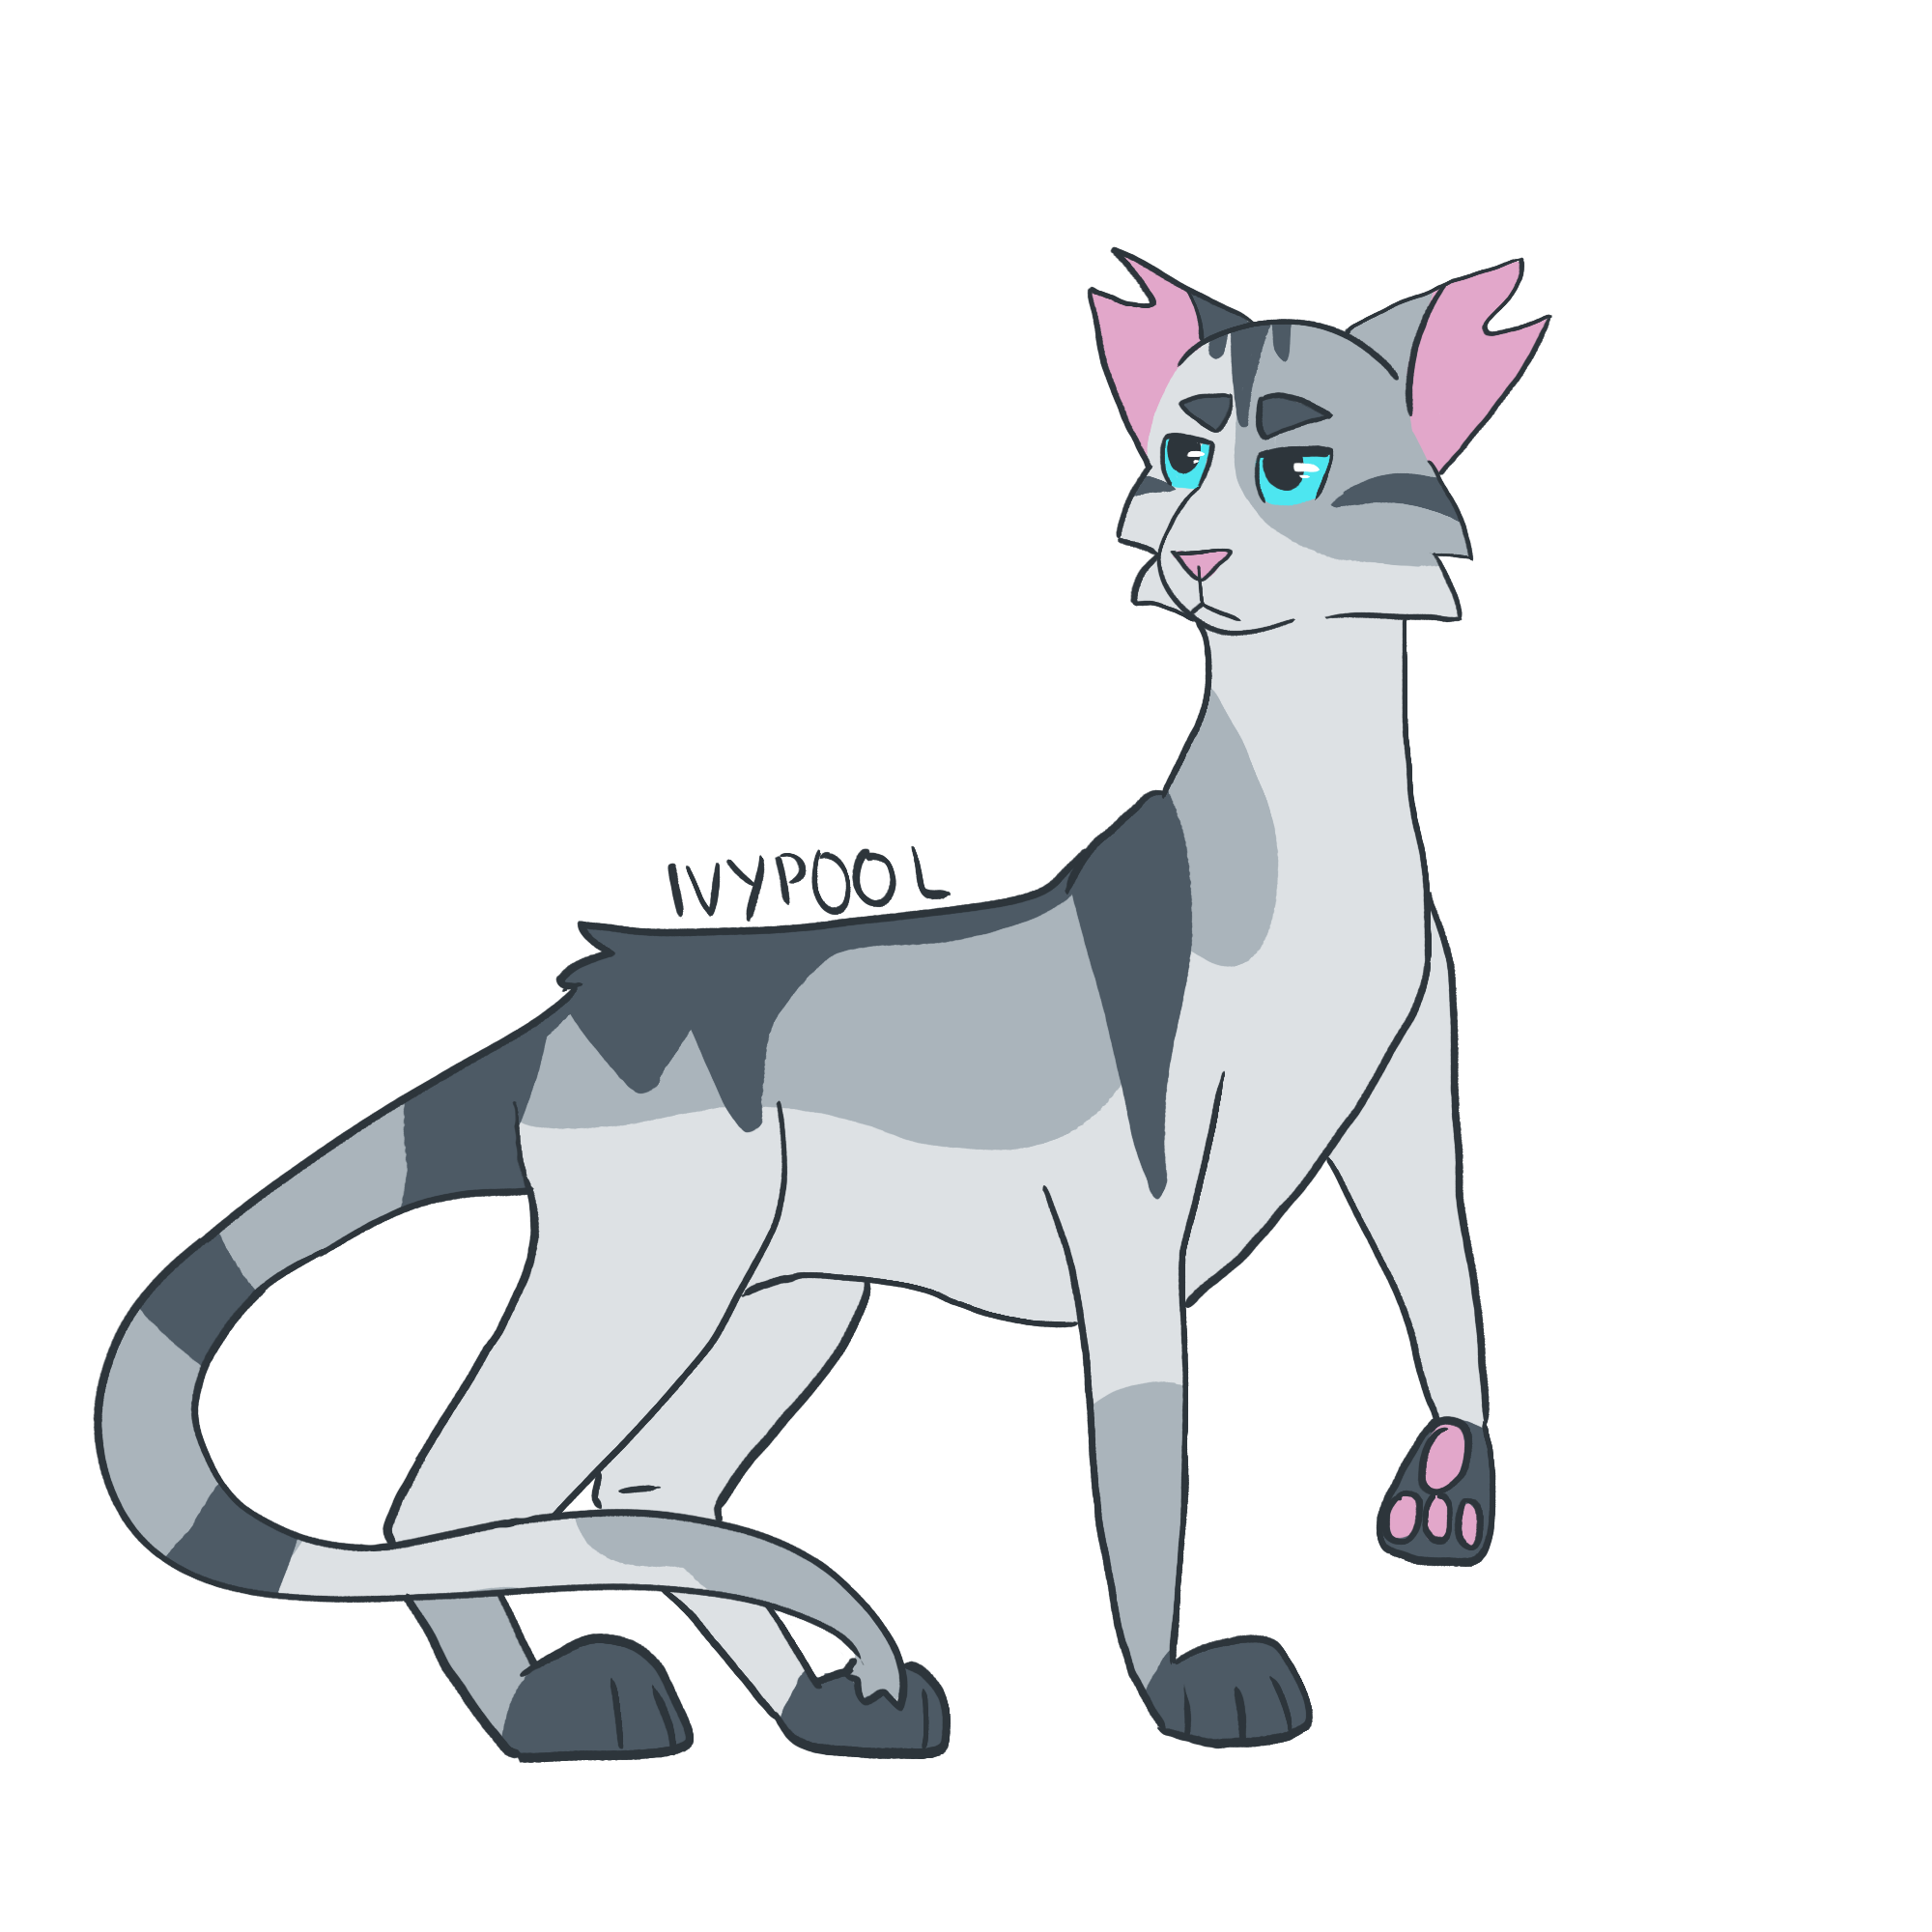 [a design of Ivypool with a neutral expression]